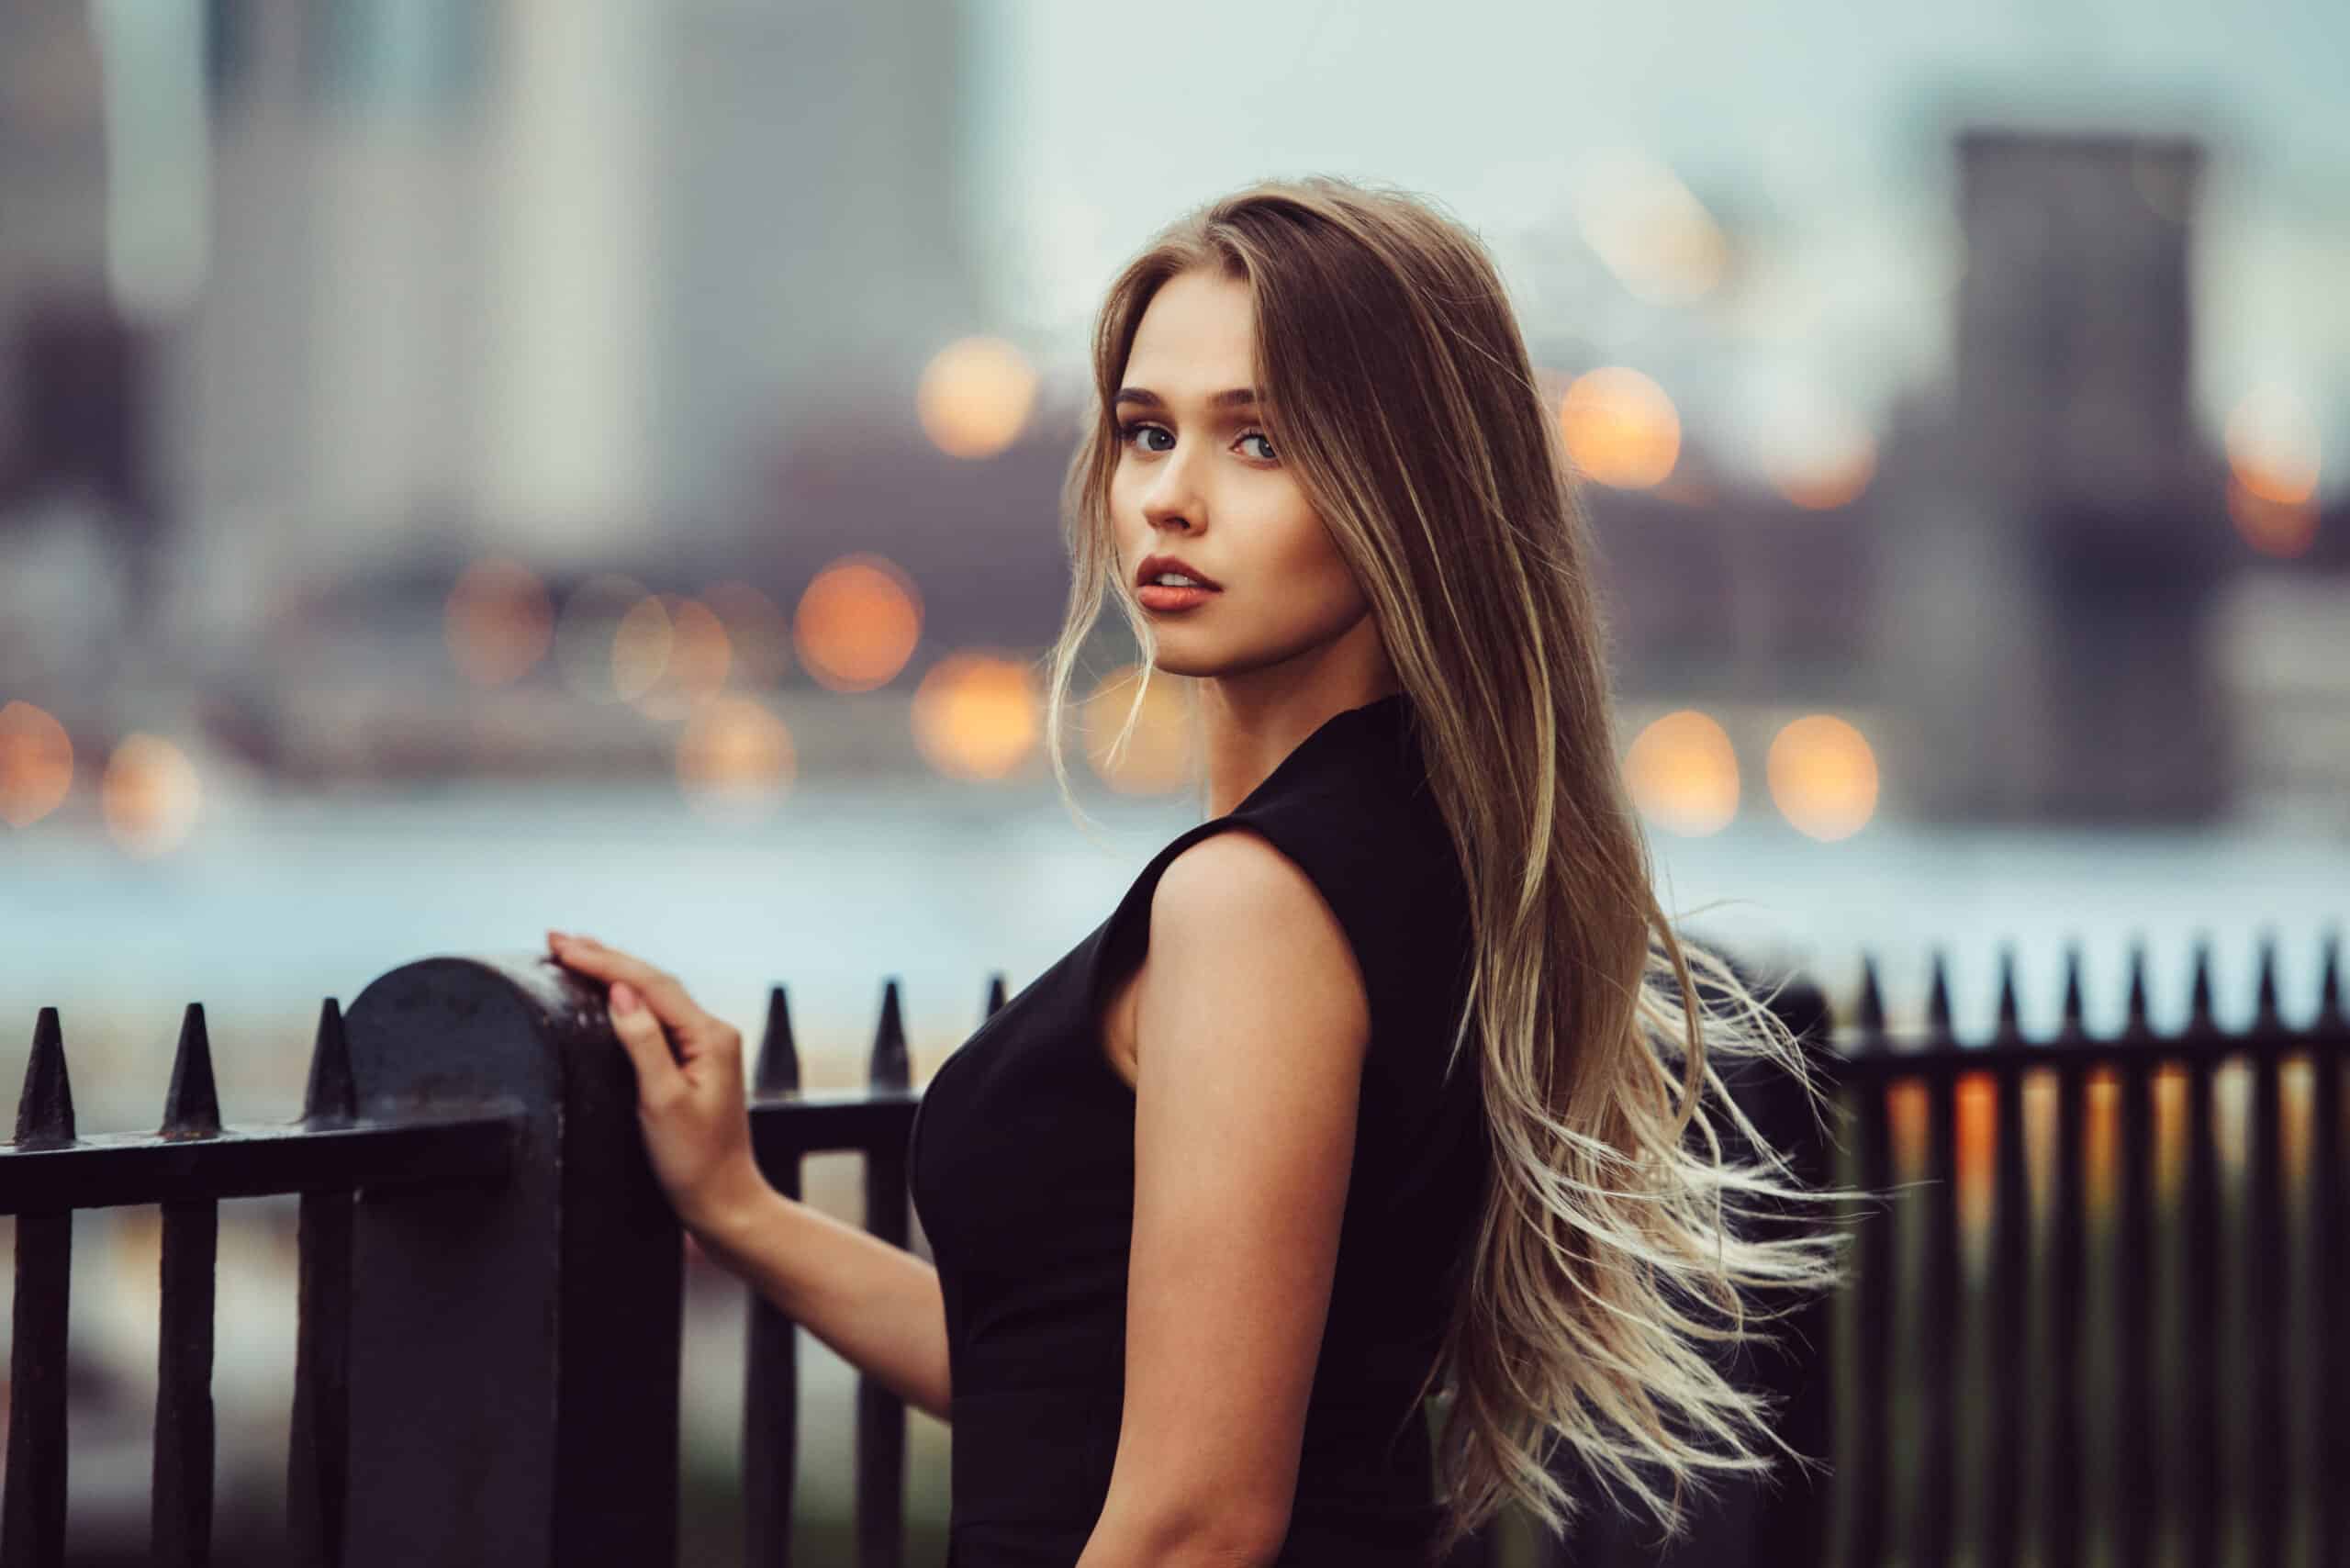 Gorgeous but sad looking young woman standing by the steel fence in city alone